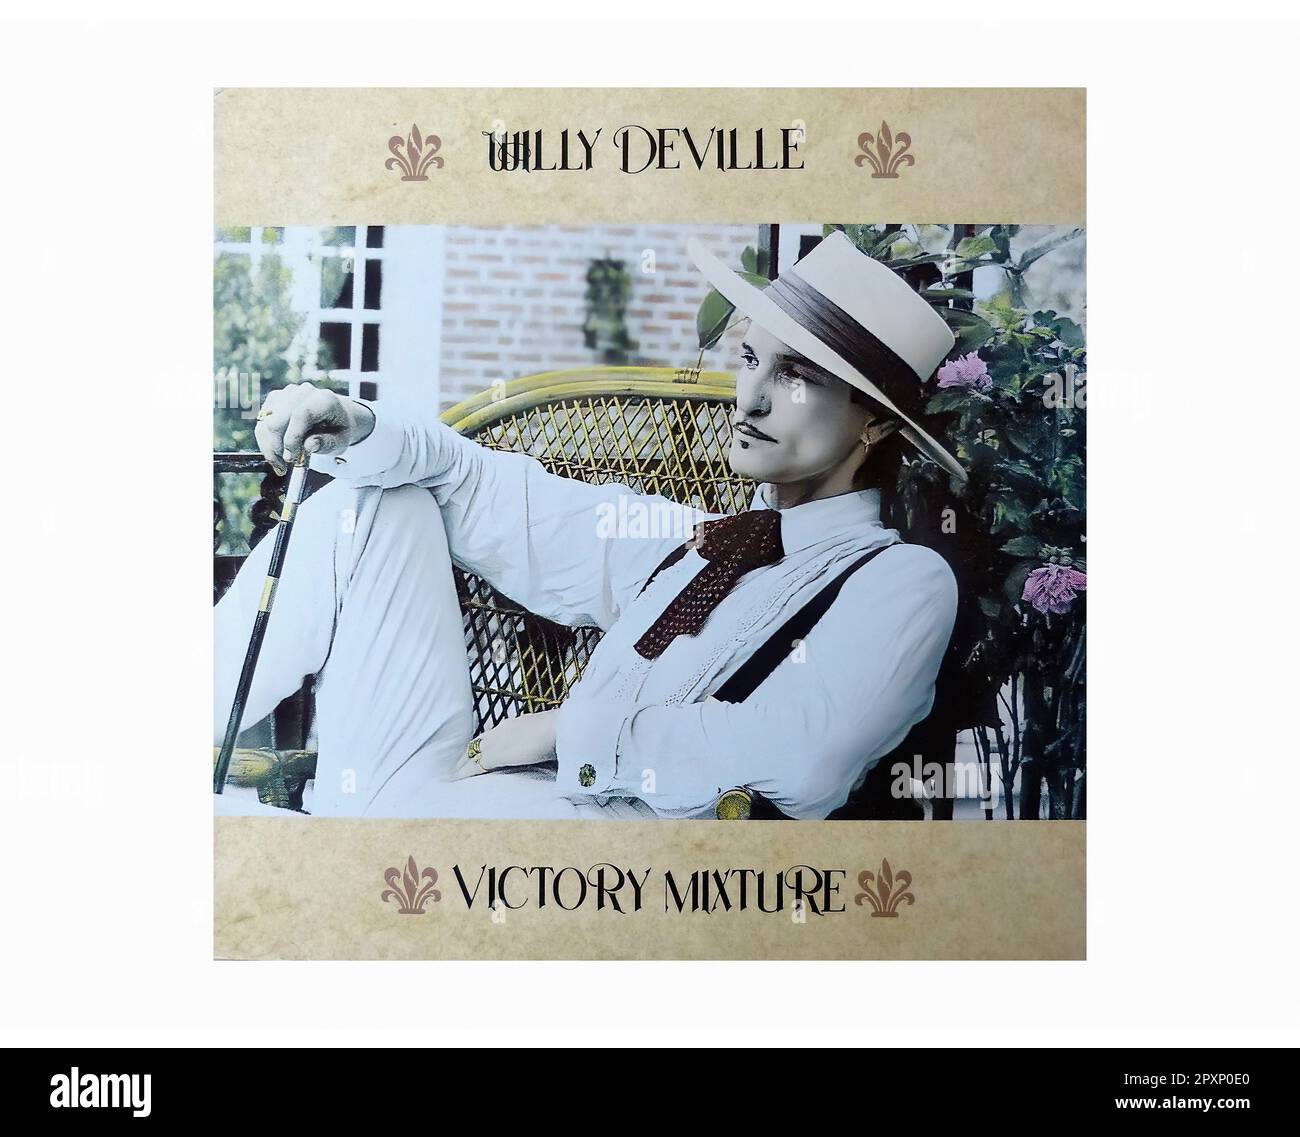 Willy DeVille - Victory Mixture - Vintage L.P Music Vinyl Record Stock Photo